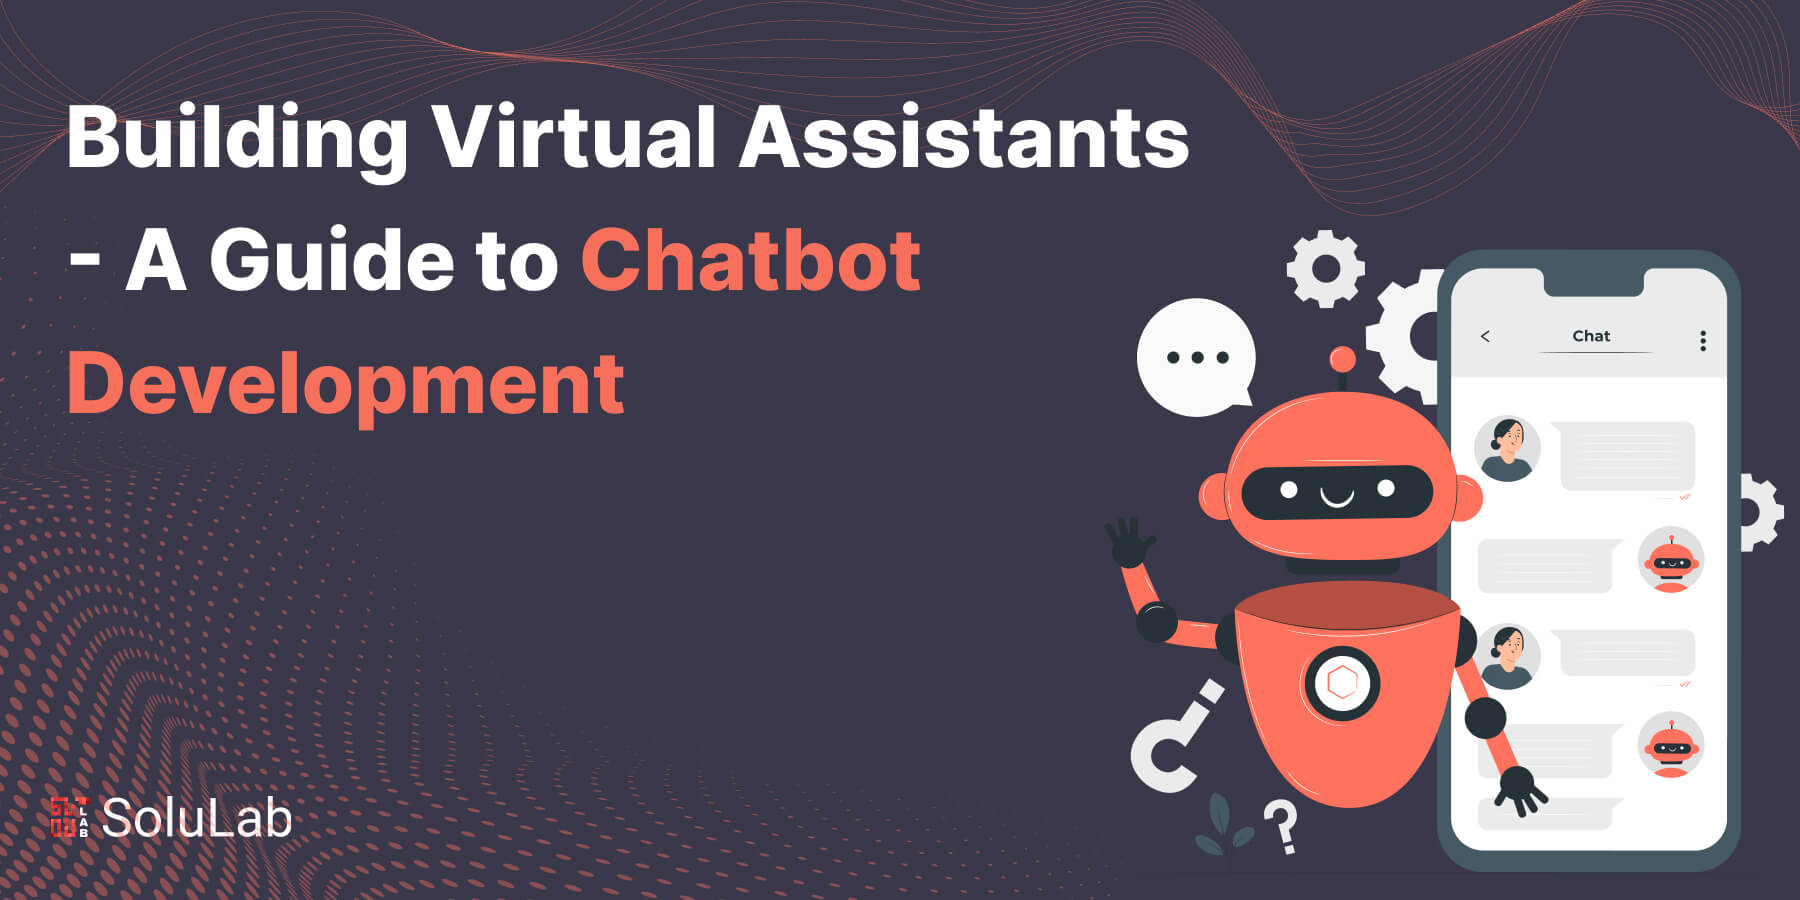 Guide to Chatbot Development